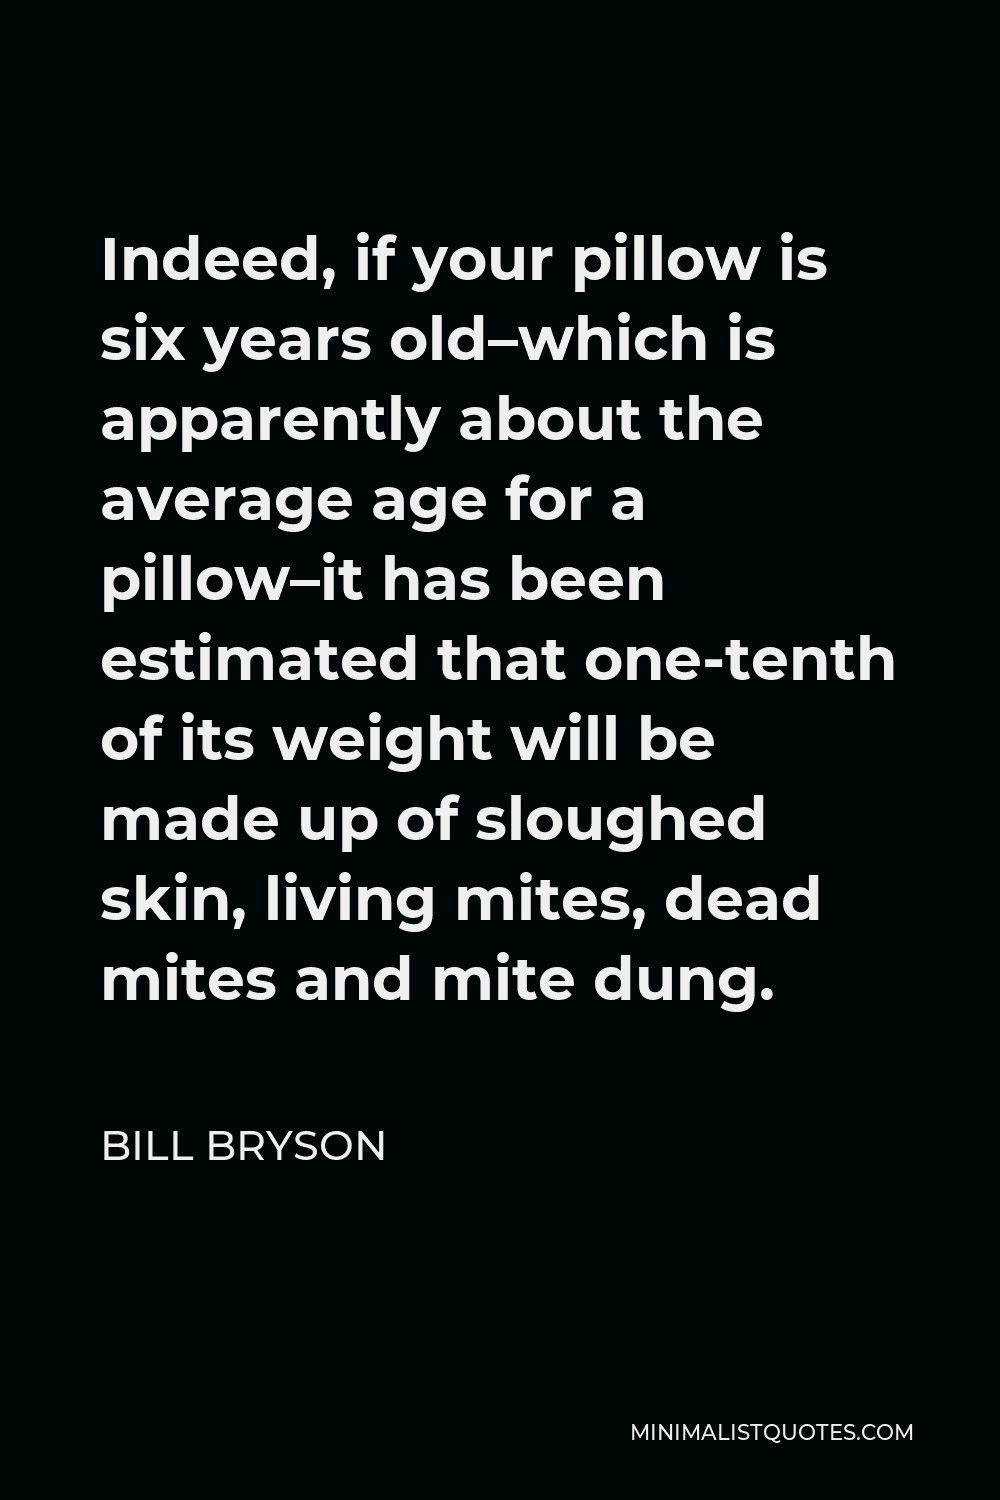 Bill Bryson Quote - Indeed, if your pillow is six years old–which is apparently about the average age for a pillow–it has been estimated that one-tenth of its weight will be made up of sloughed skin, living mites, dead mites and mite dung.